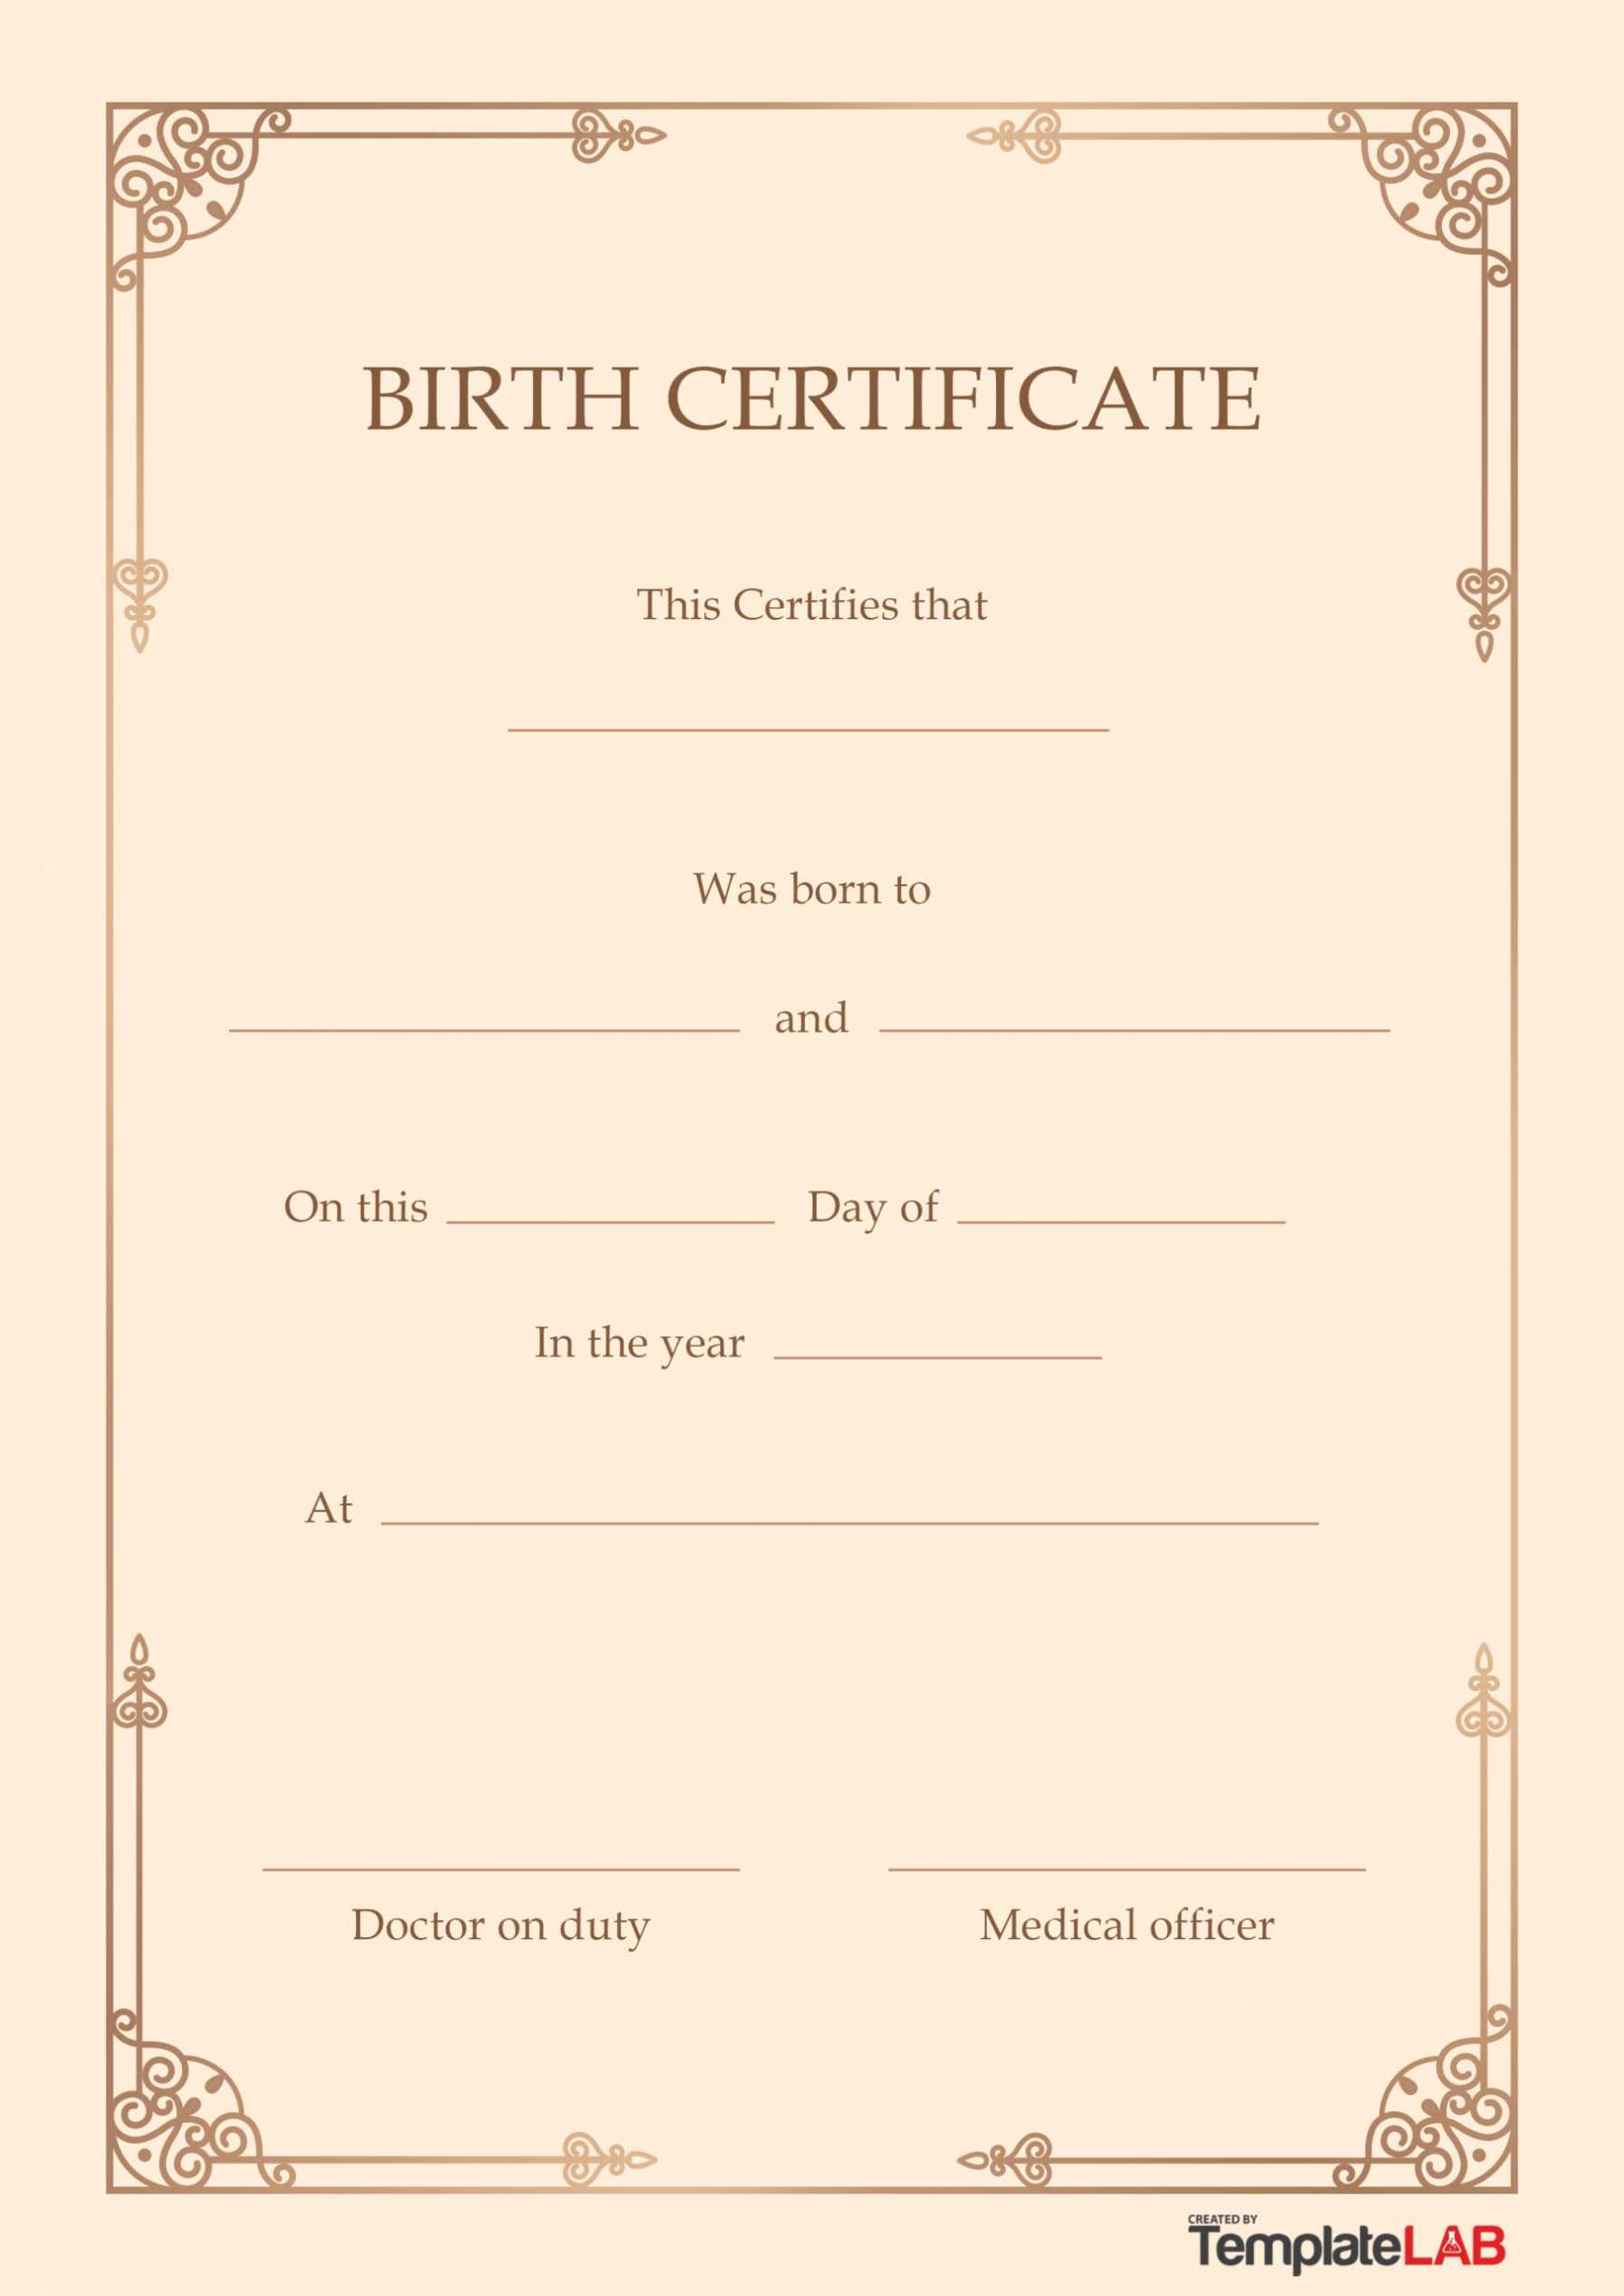 15 Birth Certificate Templates (Word &amp; Pdf) ᐅ Templatelab with regard to Birth Certificate Templates For Word